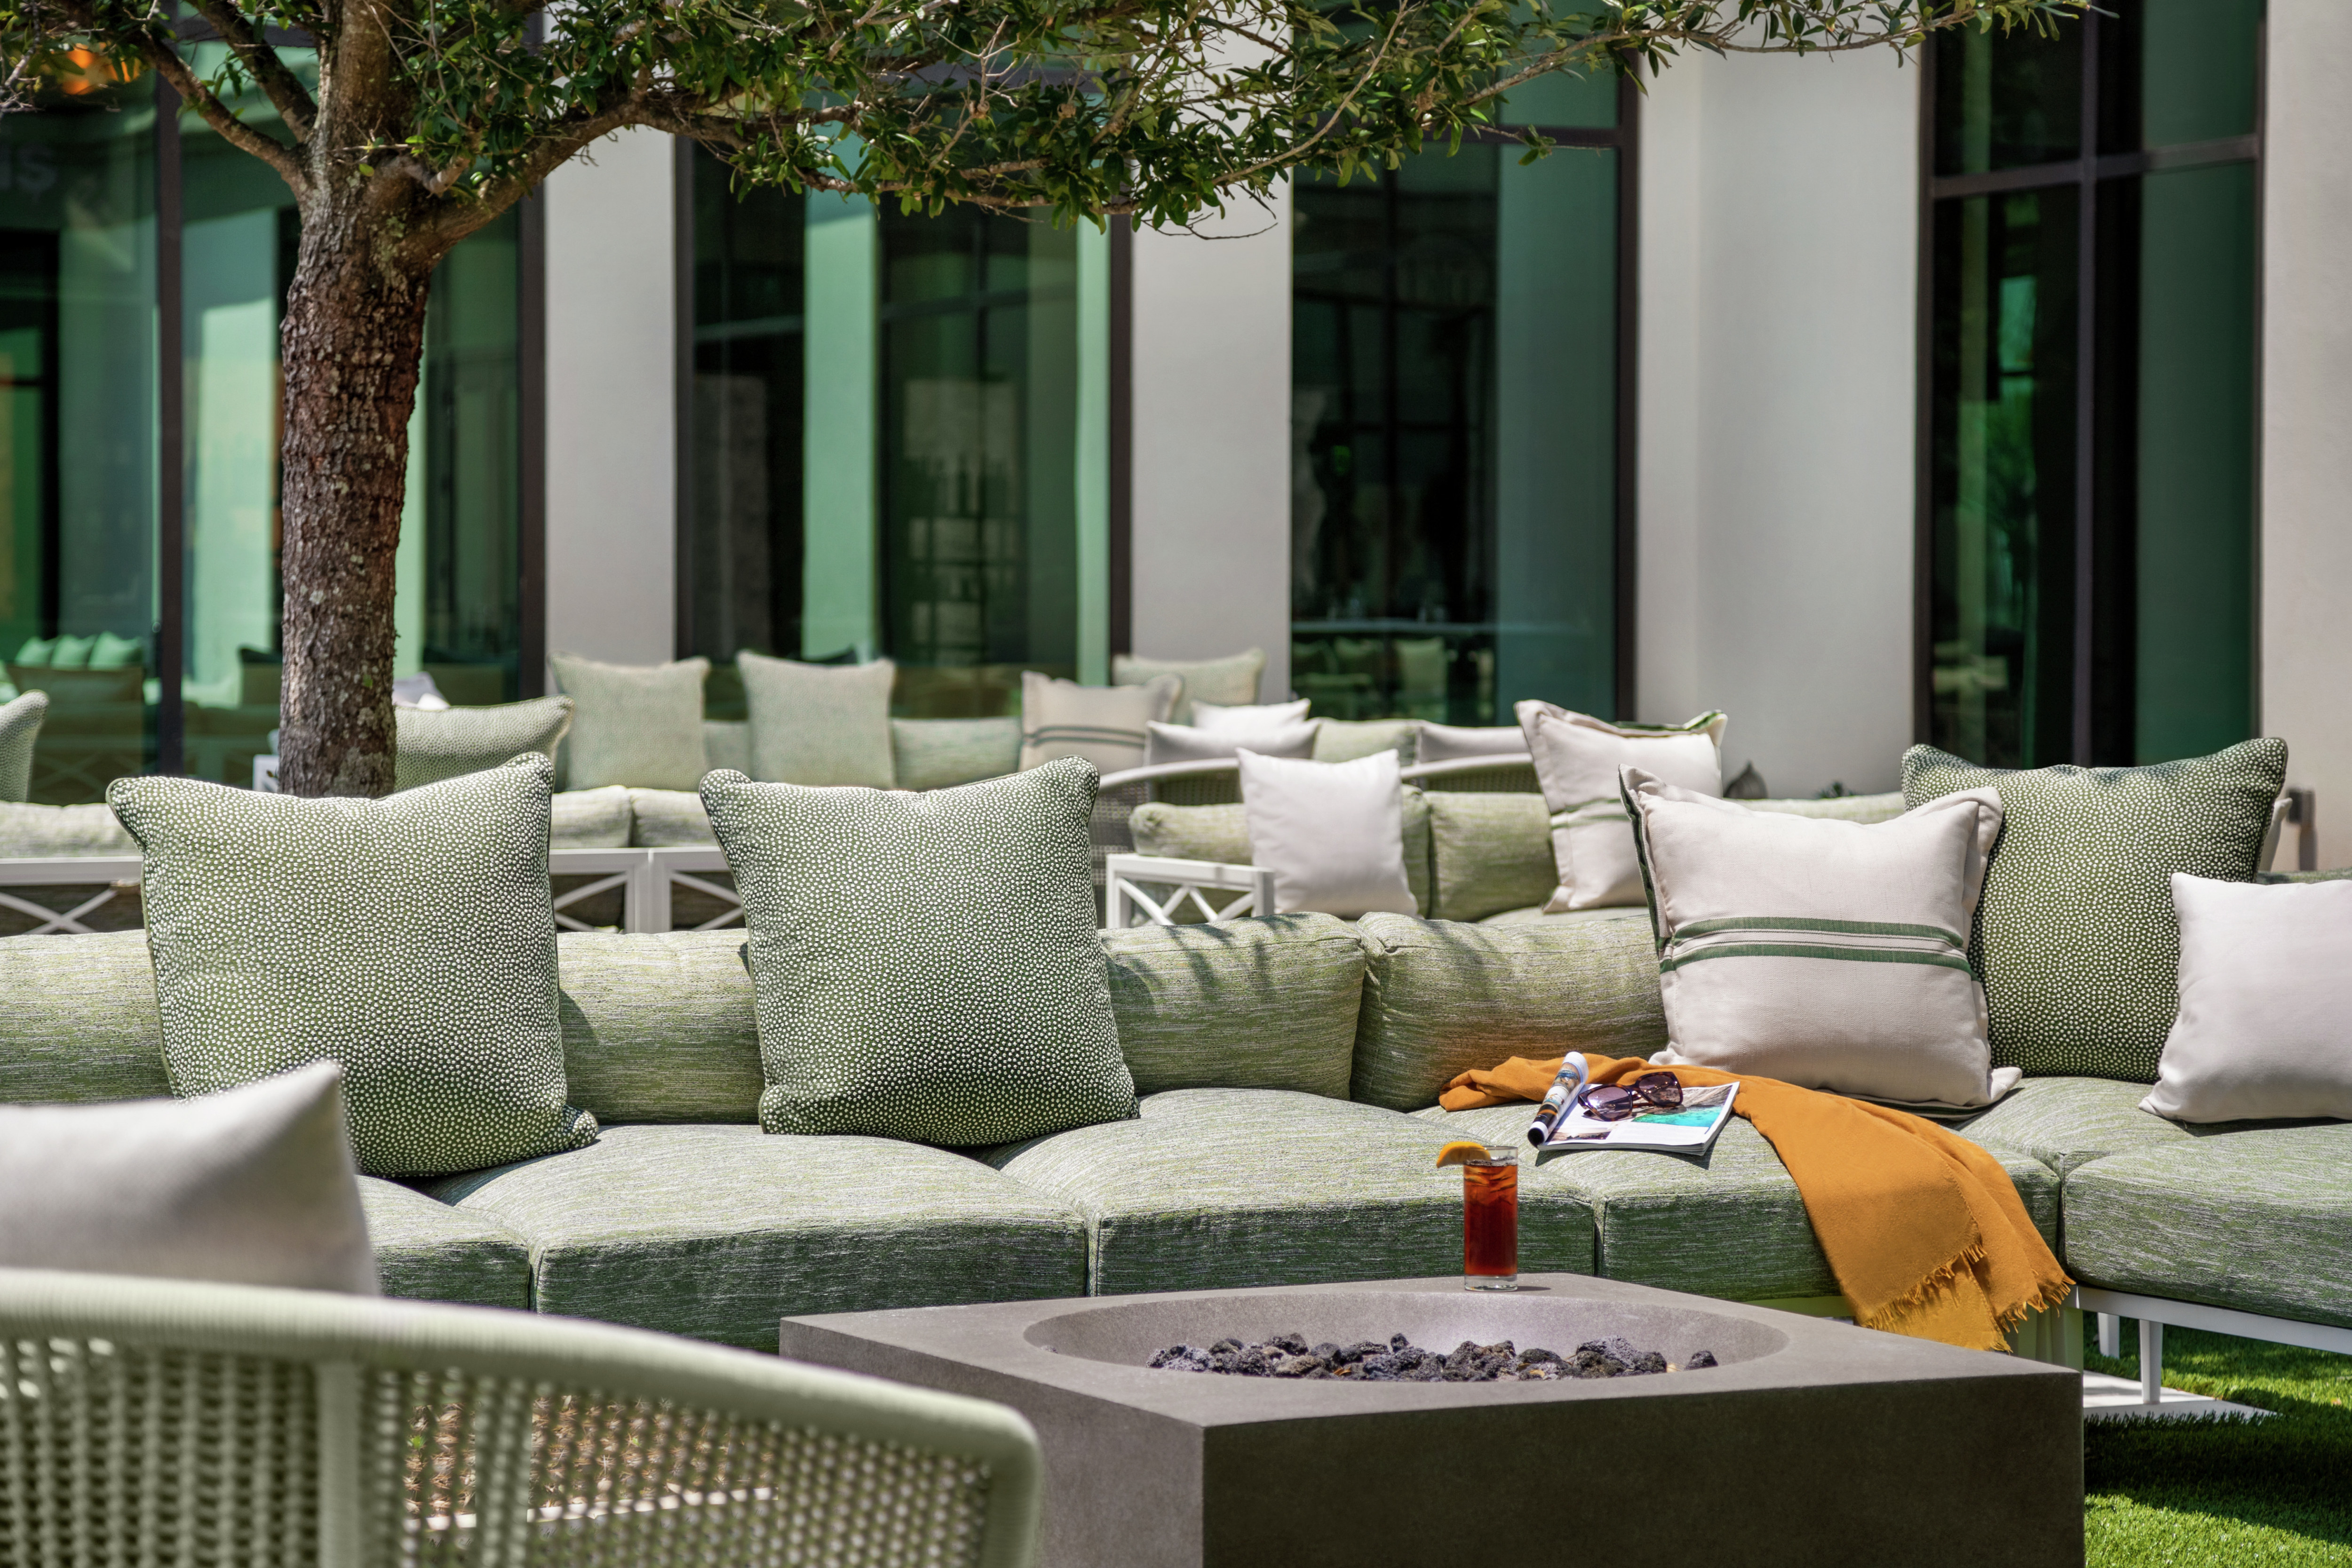 Detail shot of comfortable outdoor lounge area sofa to enjoy drinks and relaxation in the sun